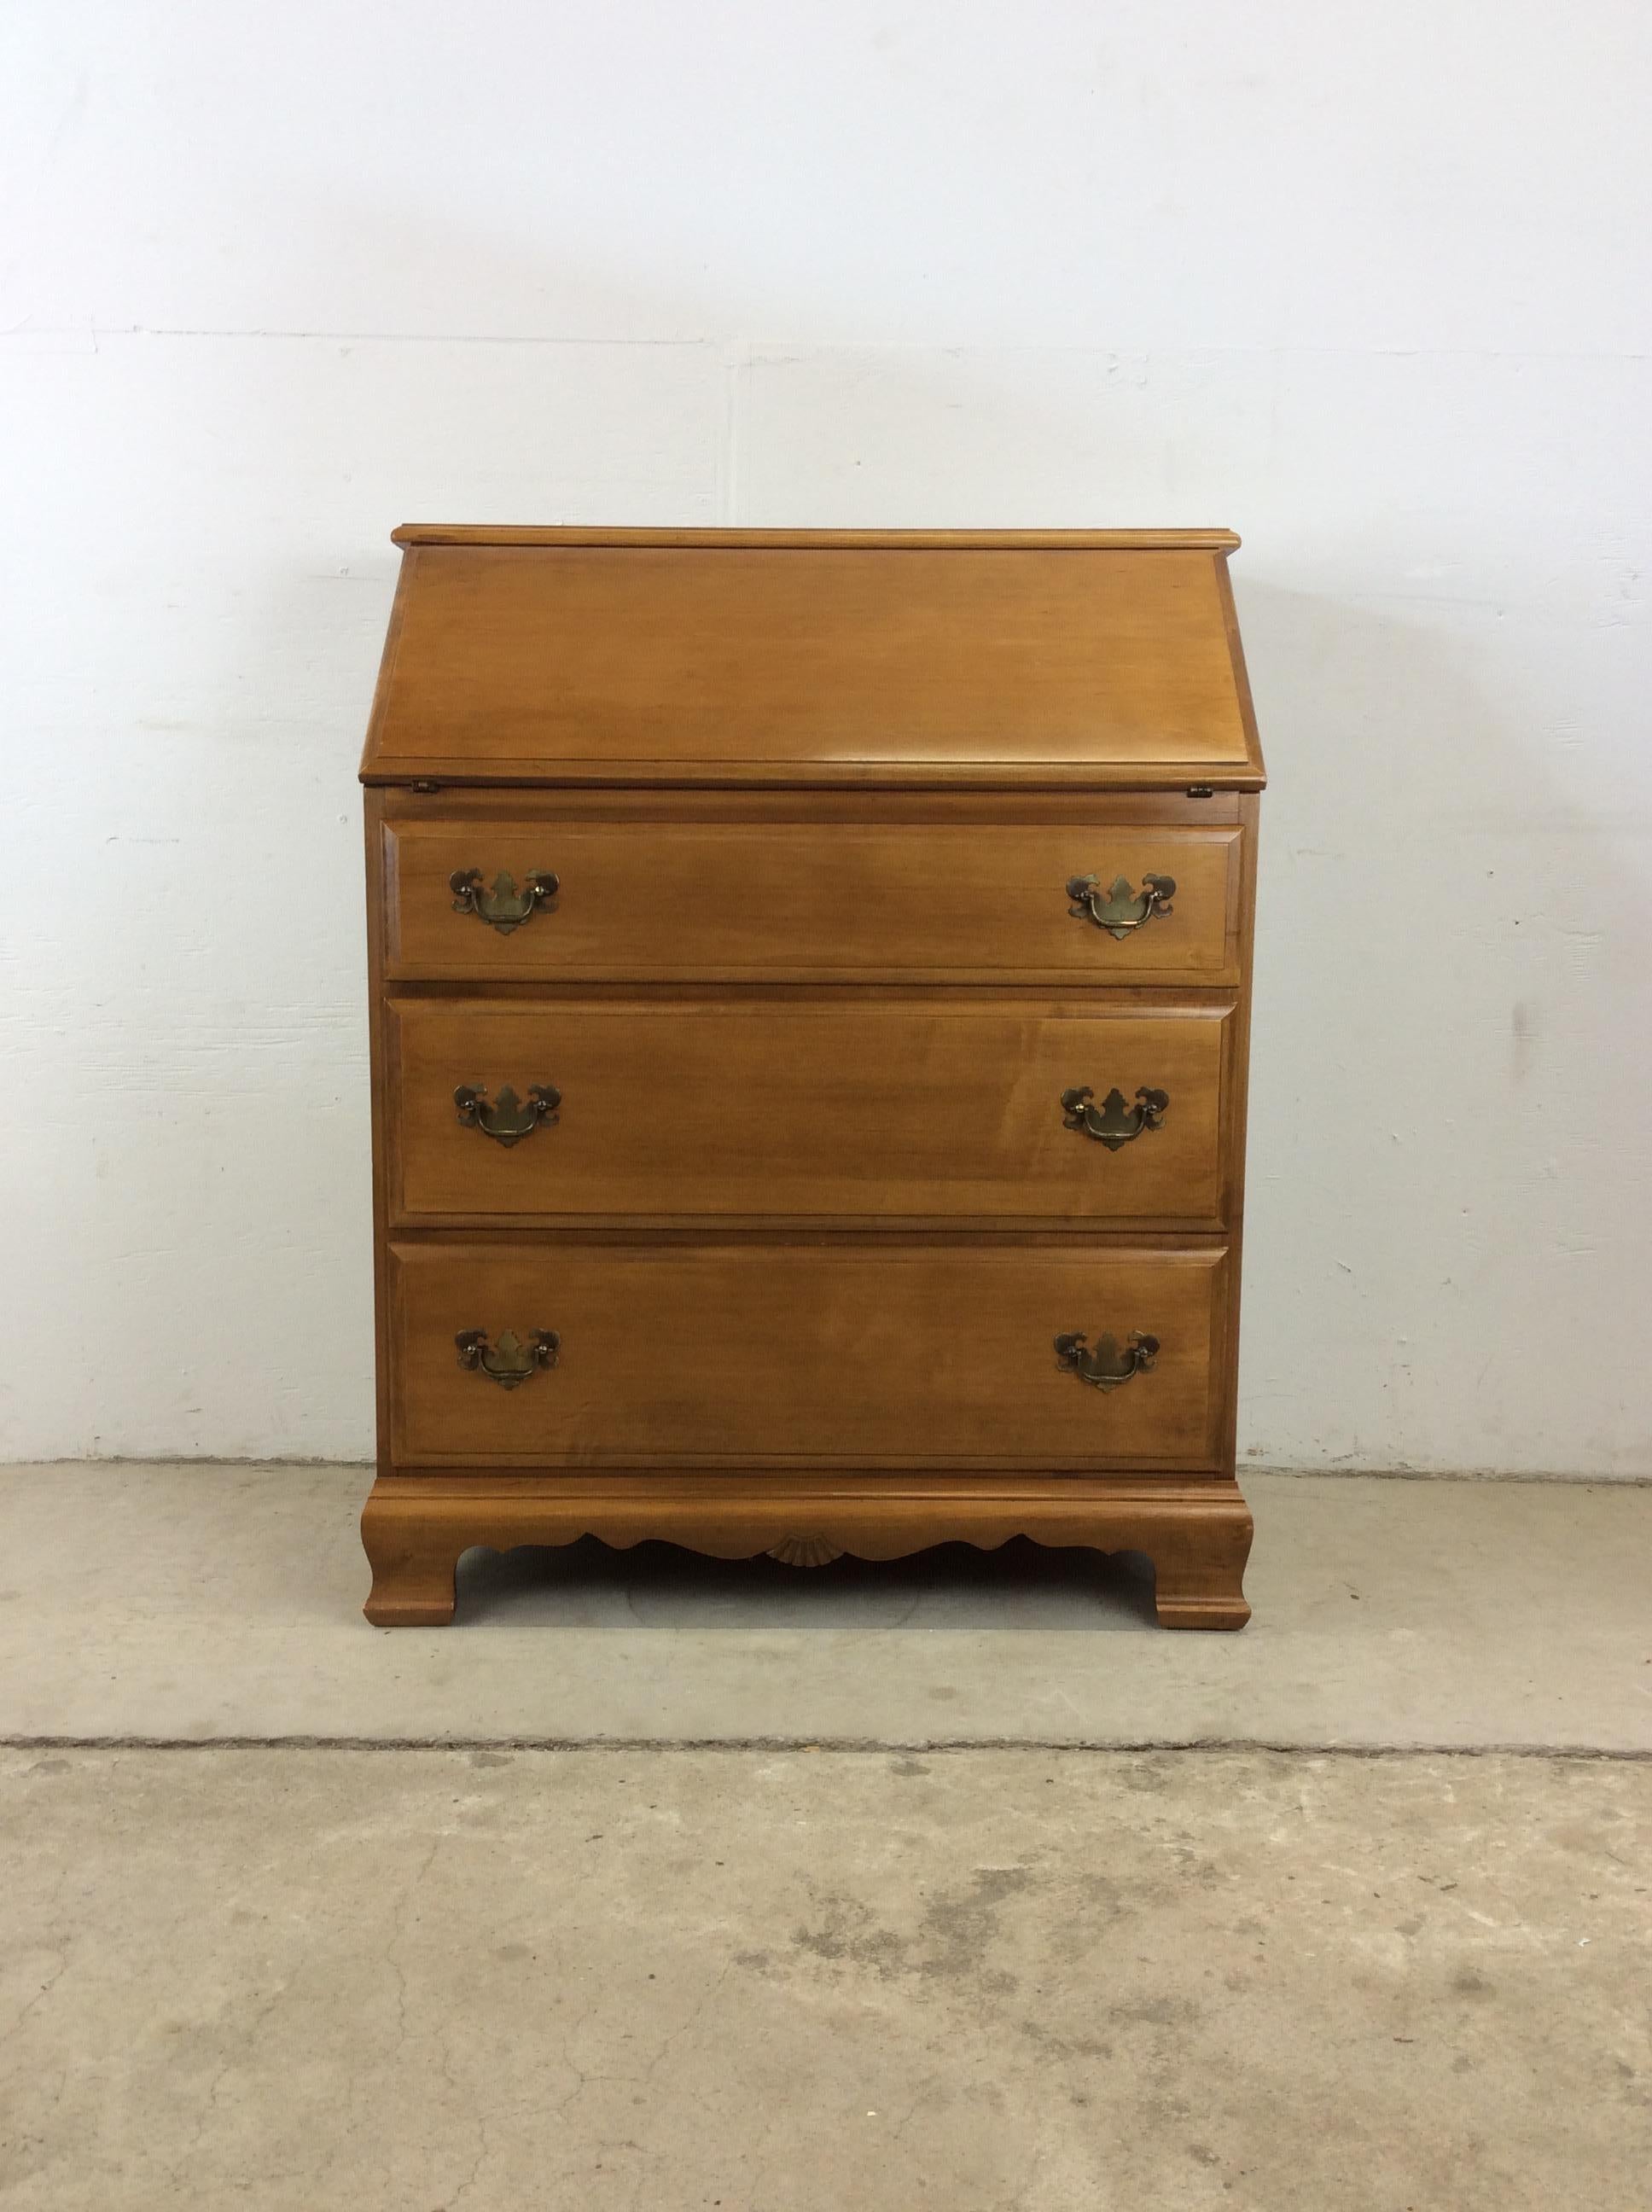 This vintage chest of drawers features solid maple construction with original finish, brass accented hardware, three dovetailed drawers and one drop front writing desk with interior storage. 

Dimensions: 31.75w 17d 39.5h

Condition: Original finish